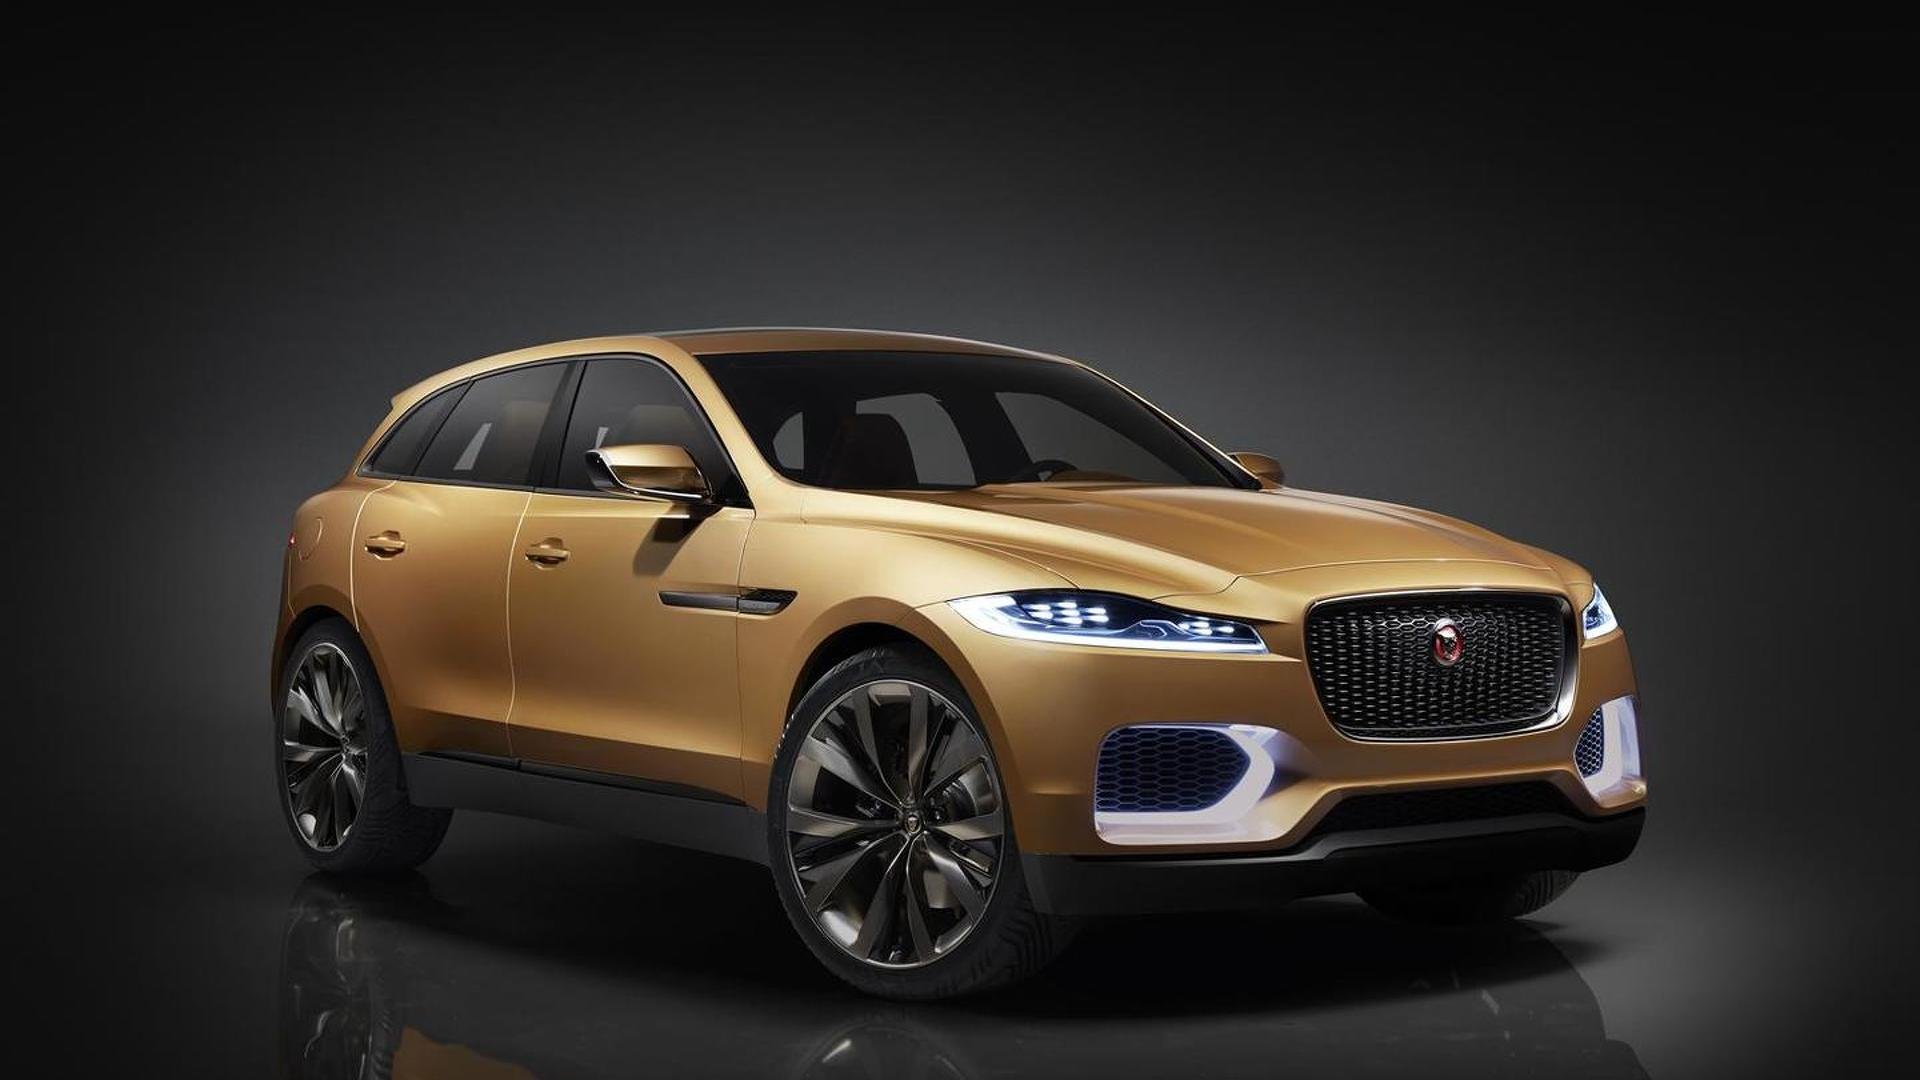 Jaguar J-Pace SUV Poised To Become All-Electric Tesla Model X Fighter